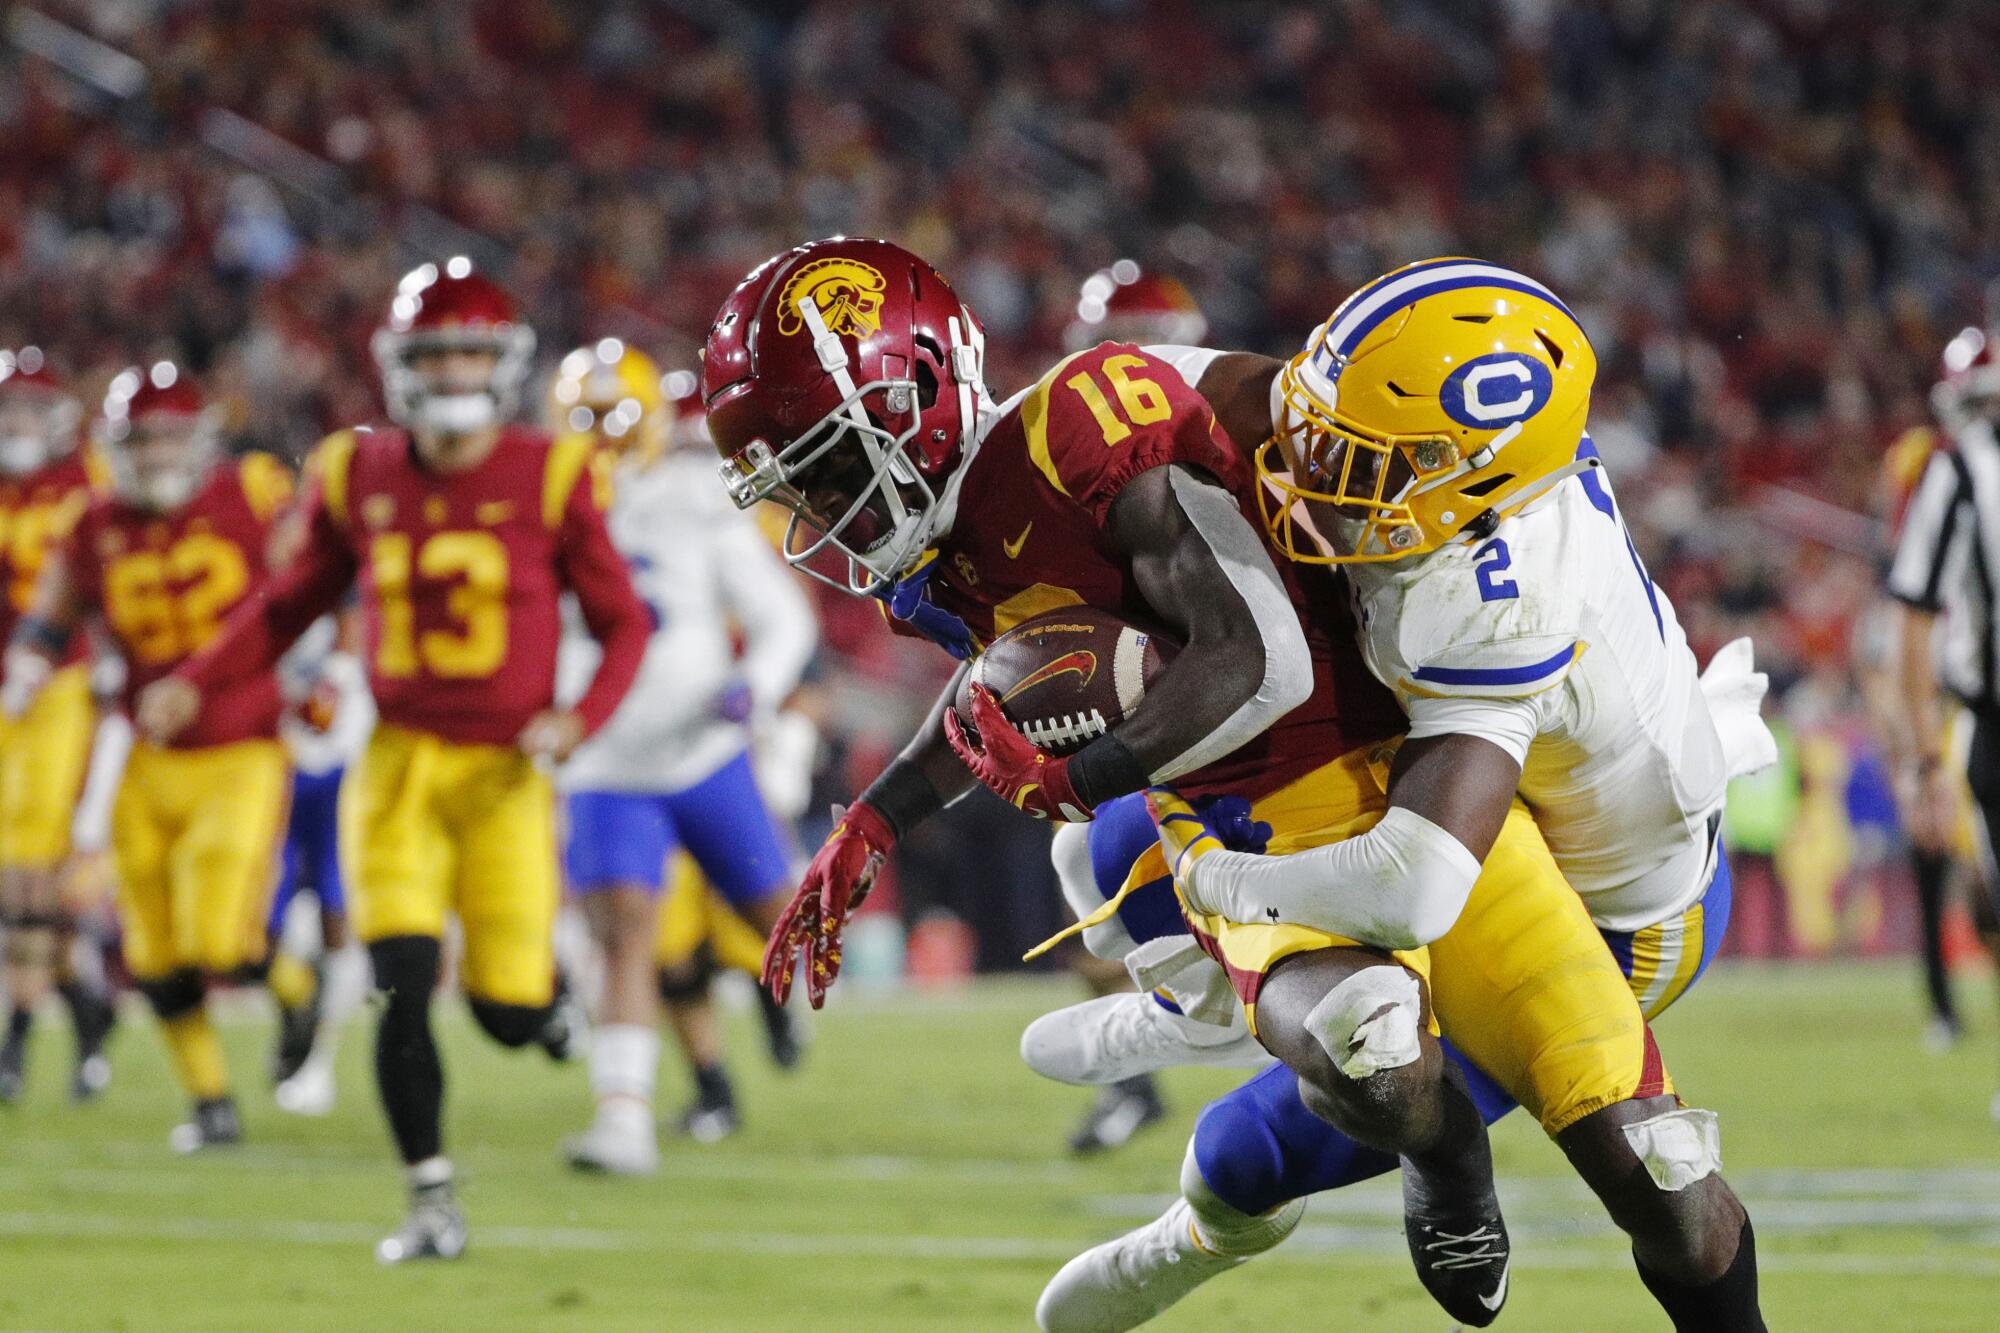 USC wide receiver Tahj Washington is tackled by California safety Craig Woodson after a 17-yard catch.